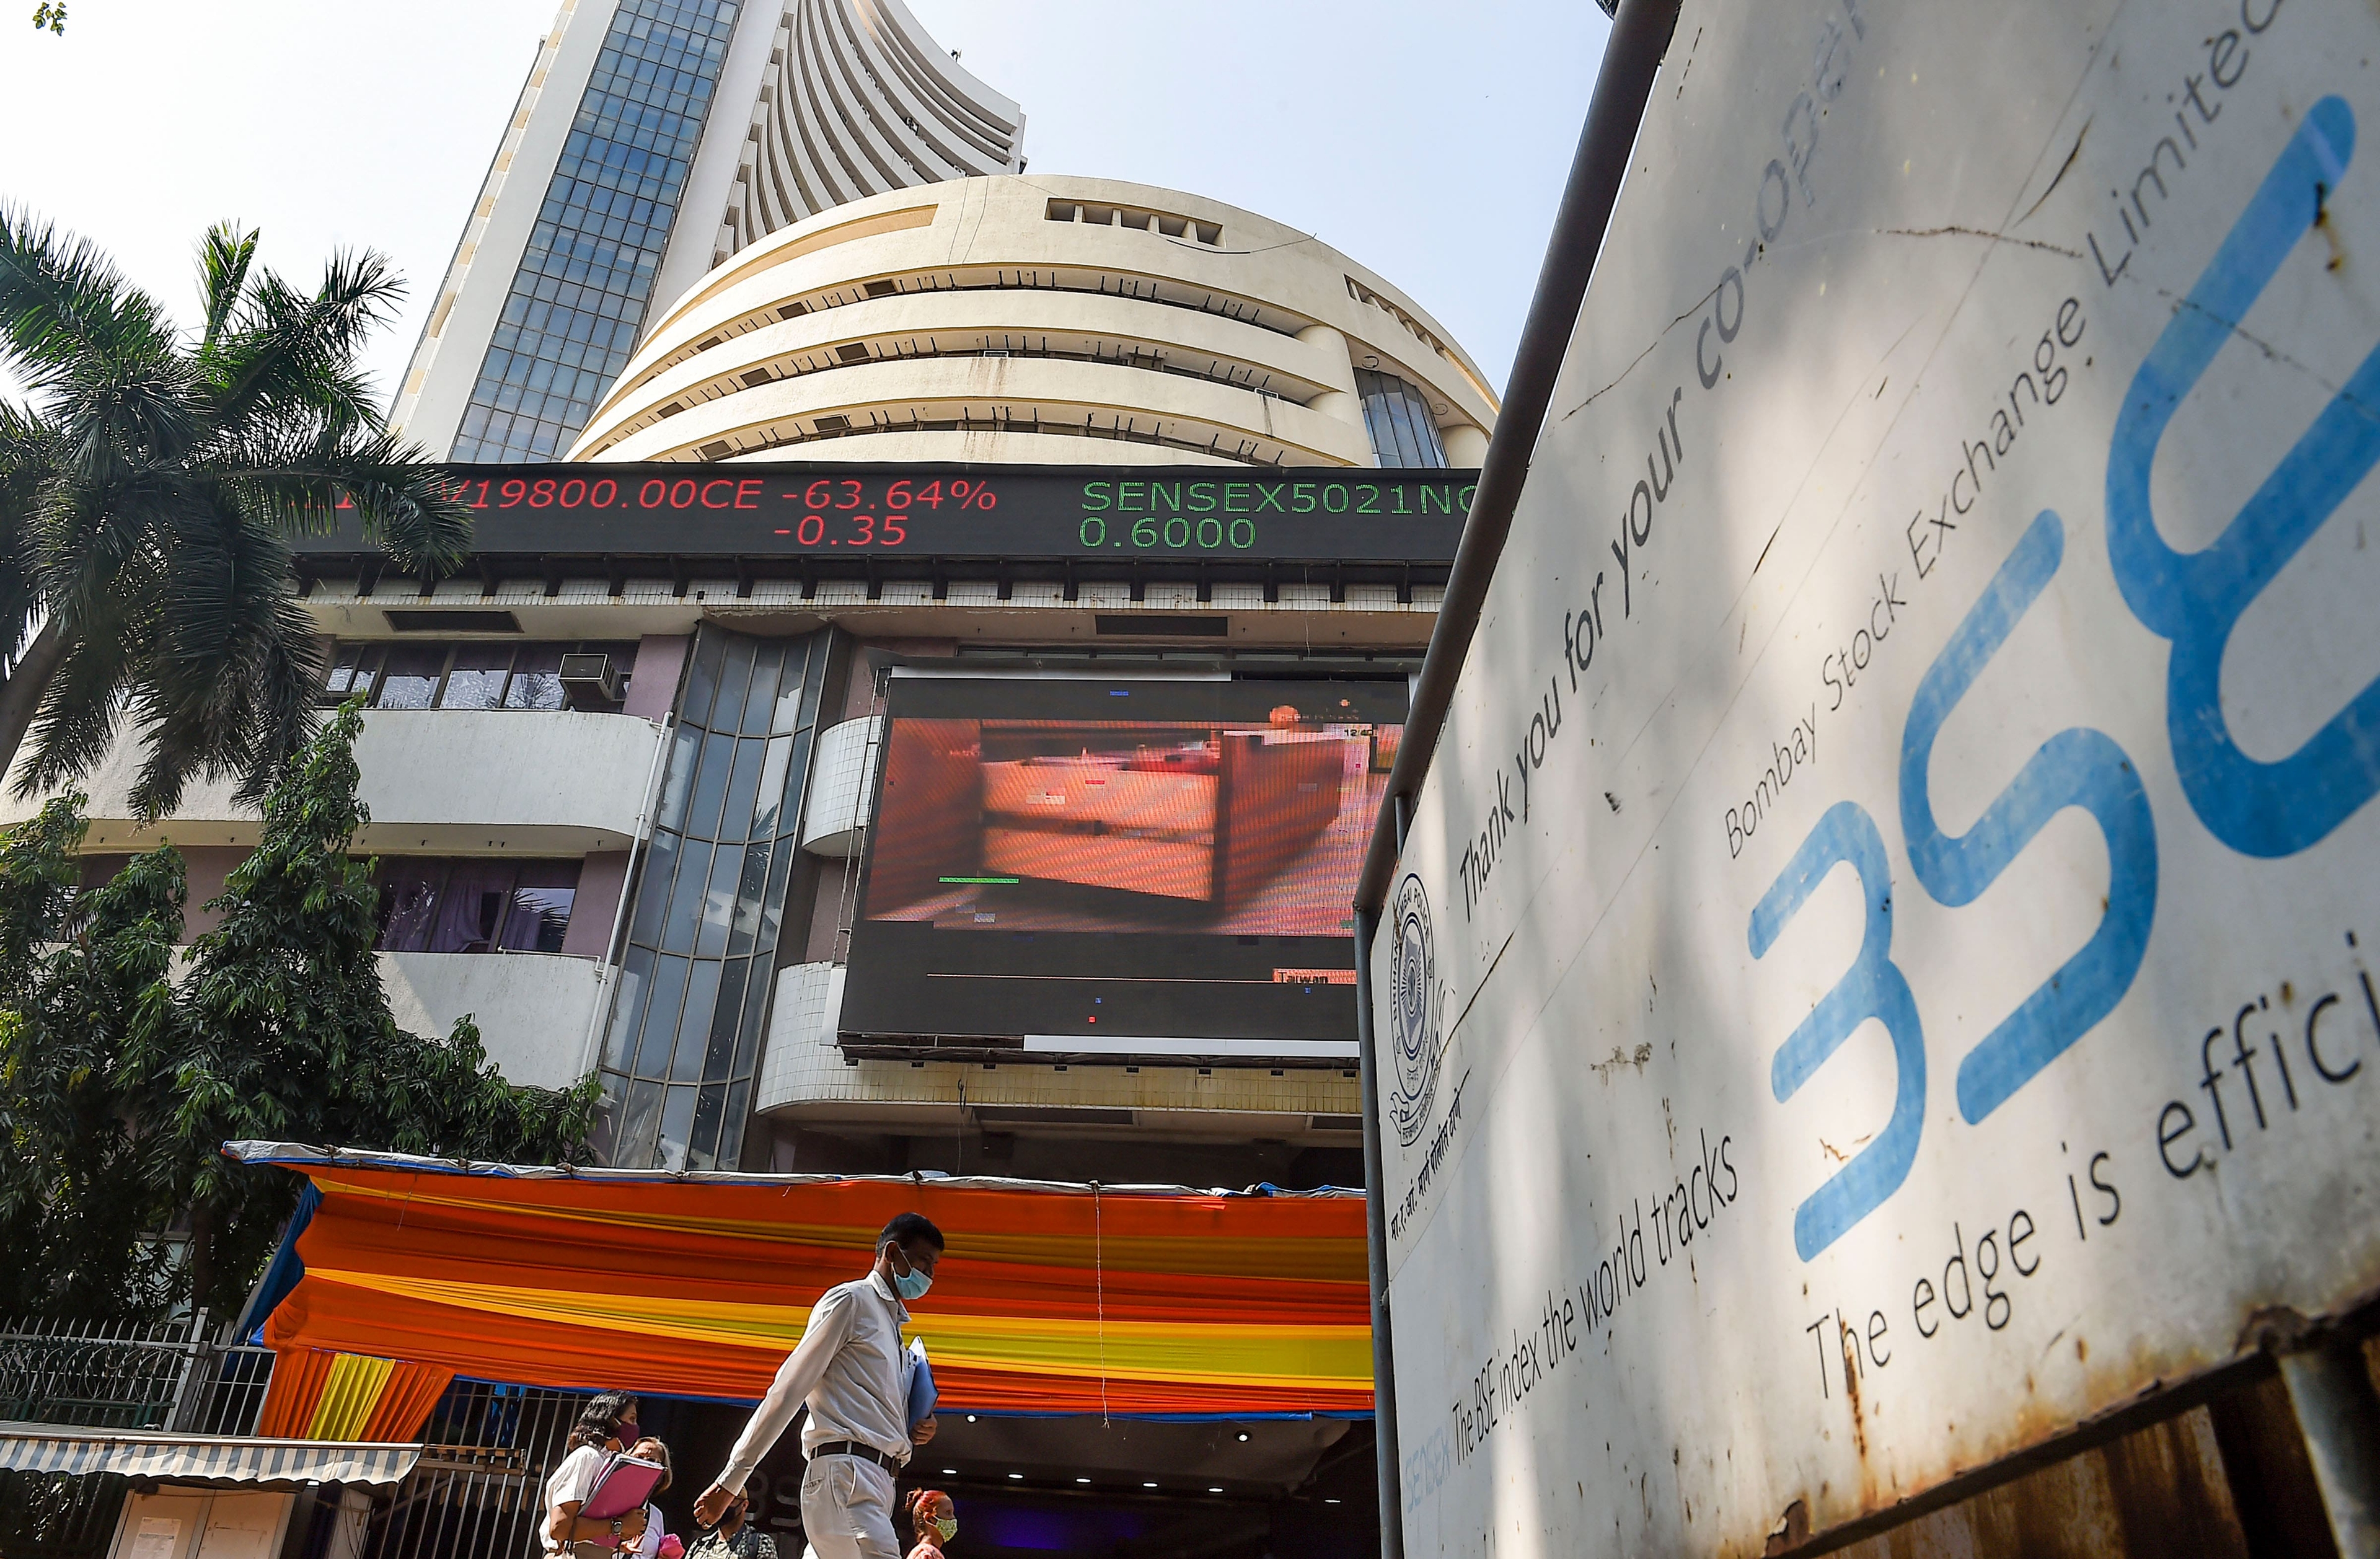 The Sensex tanked 714.53 points or 1.23 percent to end at 57,197.15 during Friday's close. The broader NSE Nifty slumped 220.65 points or 1.27 percent to 17,171.95.